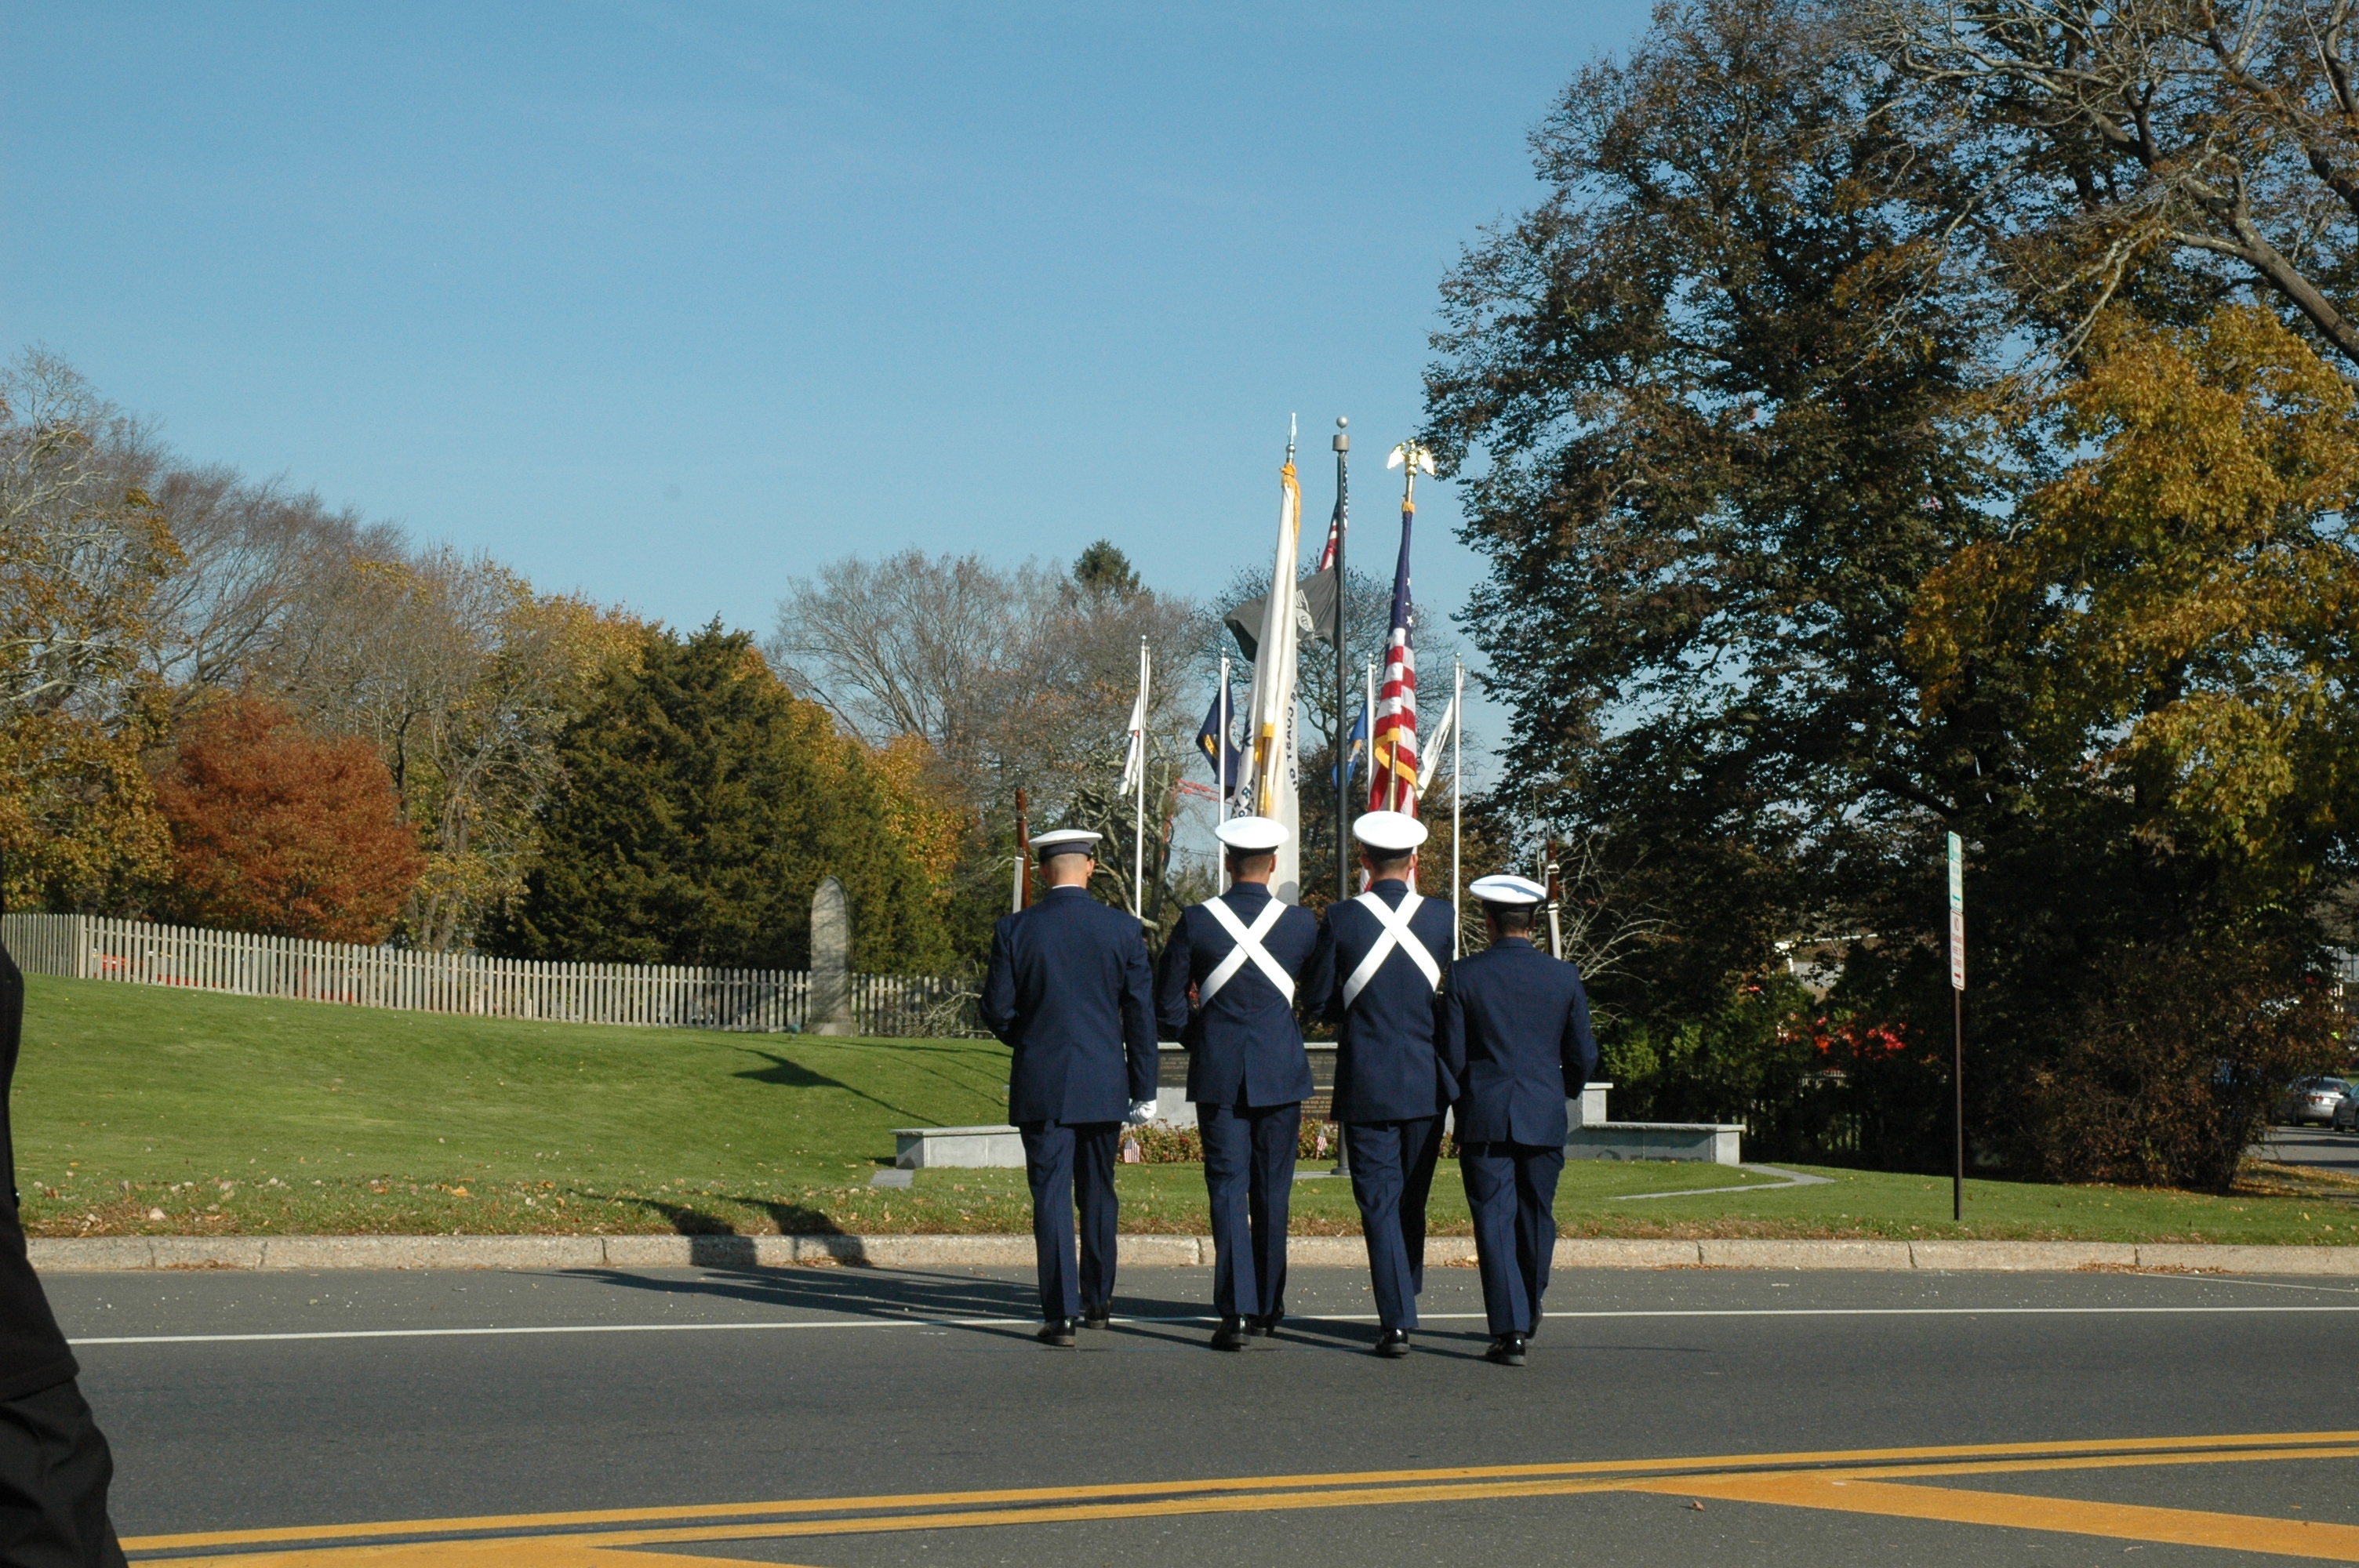 East Hampton Town and Village celebrated Veteran's Day on Monday. They started the parade near London Jeweler's and ended at Hook Mill.  ELIZABETH VESPE